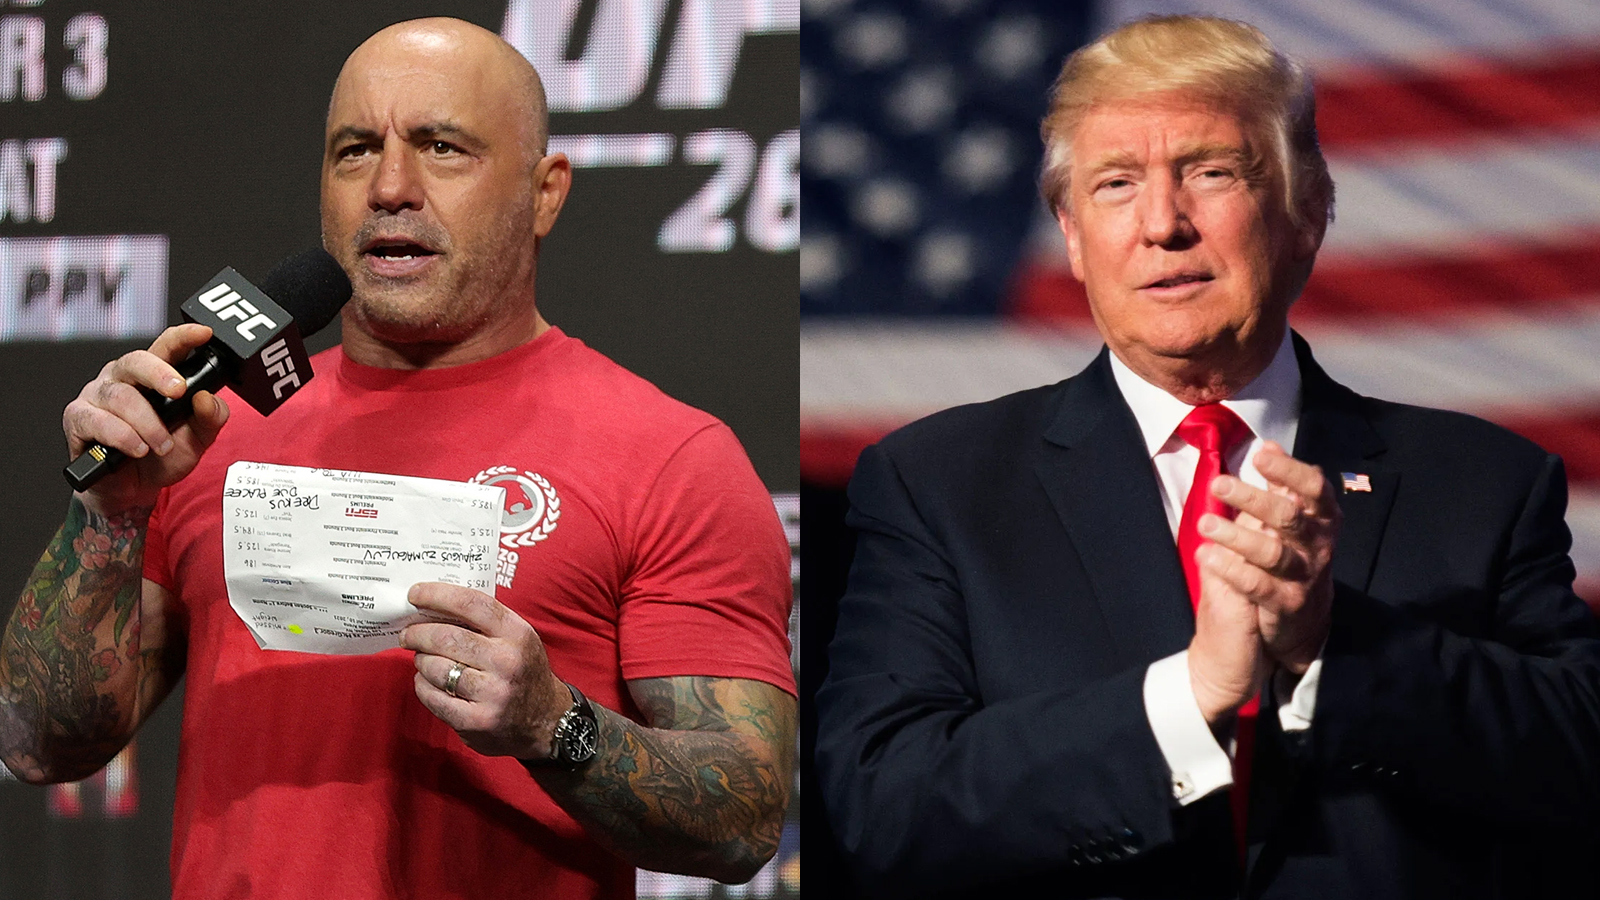 Joe Rogan Refused To Interview Donald Trump On His Podcast